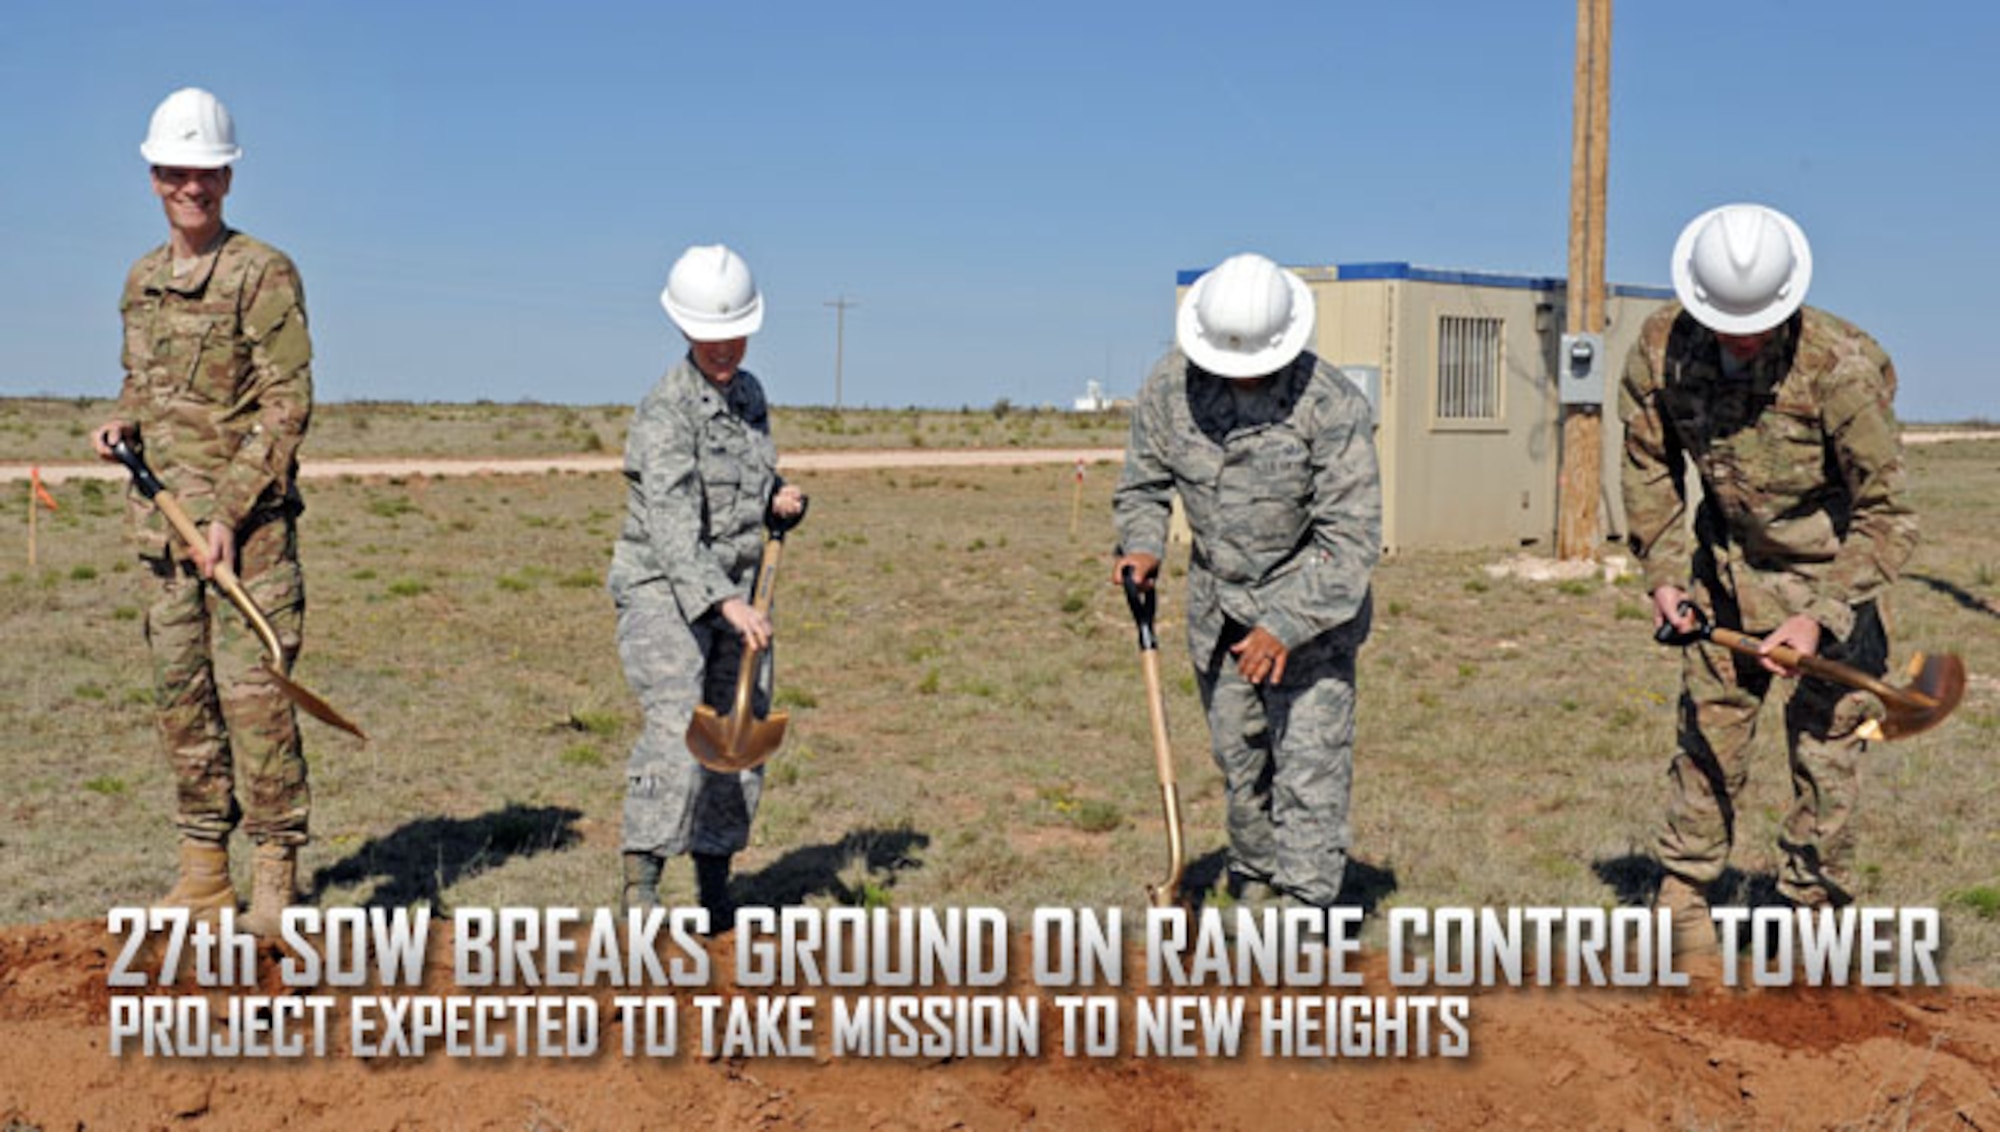 From left to right, Col. Ben Maitre, 27th Special Operations Wing Commander, Lt. Col. Shawn Young, 27th Special Operations Air Operations Squadron commander, Lt. Col. Tony Diaz, 27th Special Operations Contracting Squadron commander, and Lt. Col. Joel Sloan, 27th Special Operations Civil Engineer Squadron commander, break ground on the site where a new Range Control Officer Tower is scheduled to be built April 22, 2016 at Melrose Air Force Range, N.M. The RCO Tower is the point from which a designated officer controls activity on MAFR, a 70,000-acre Air Force primary training range that is integral to making sure Special Operations Forces attached to United States Special Operations Command stay lethal and relevant to today’s fight (U.S. Air Force photo/Staff Sgt. Whitney Amstutz)